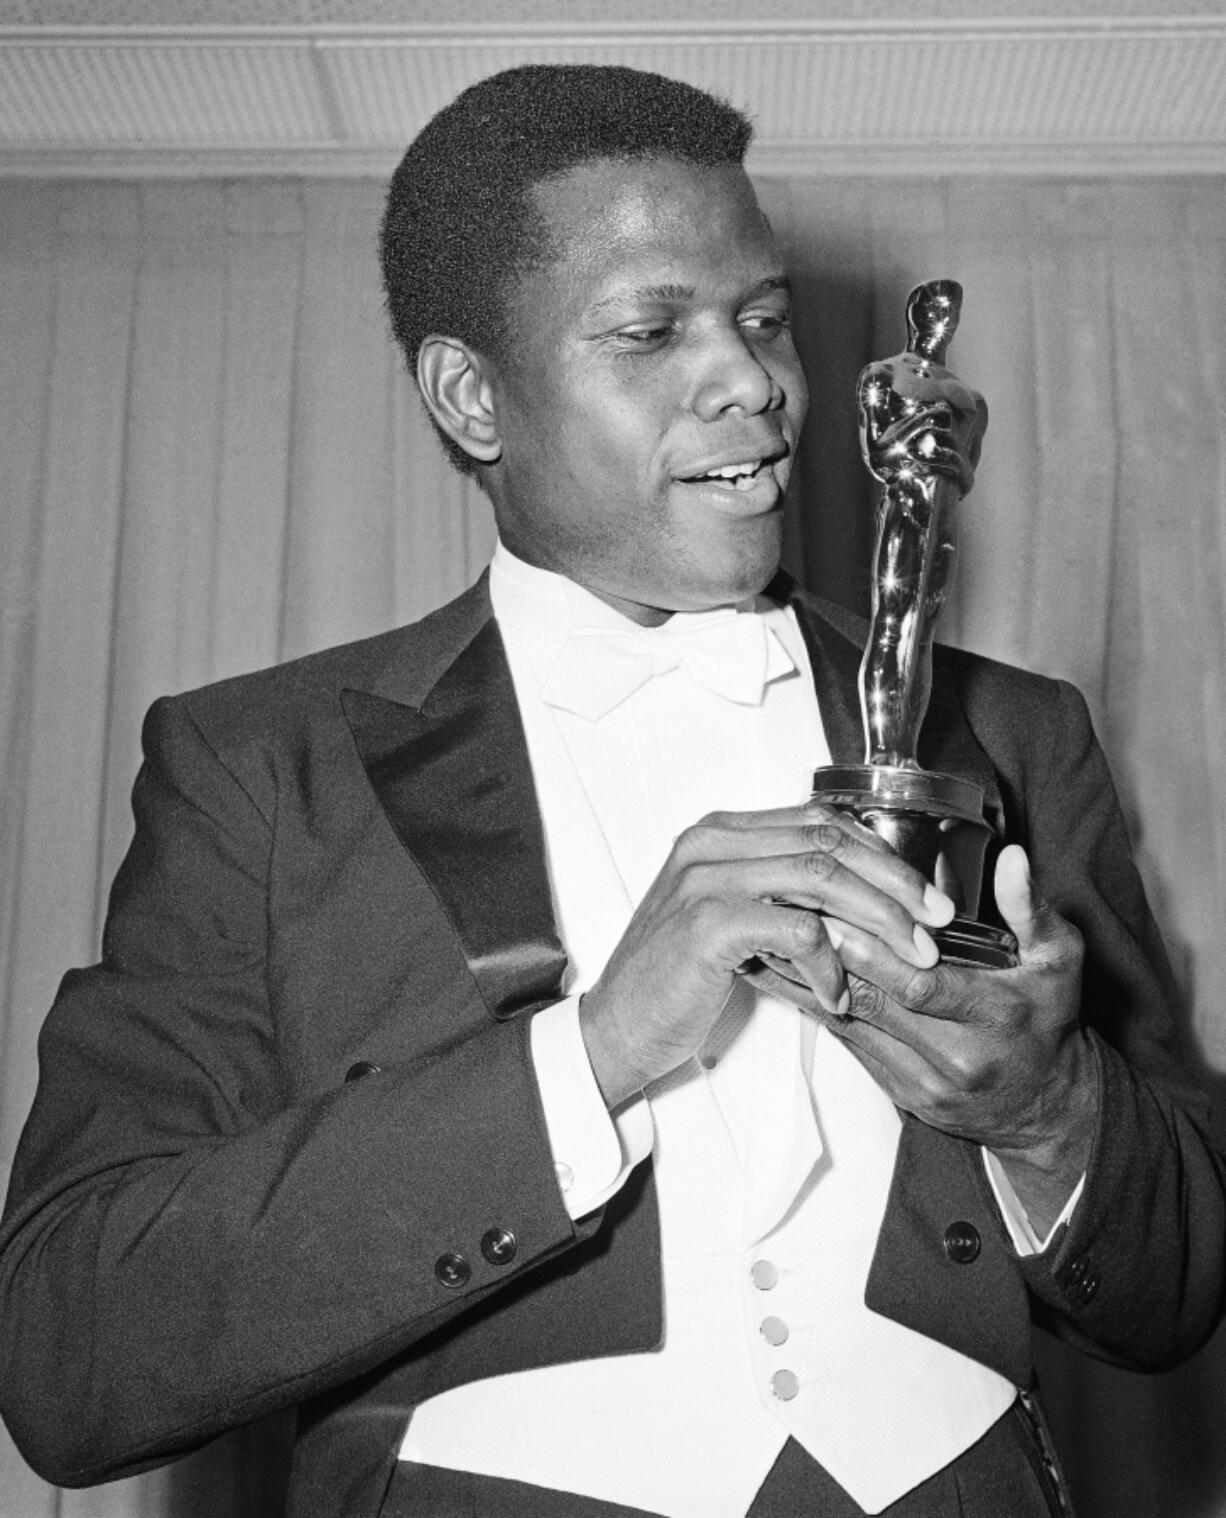 Sidney Poitier poses with his Oscar for best actor for "Lilies of the Field" at the 36th Annual Academy Awards in Santa Monica, Calif., on April 13, 1964.